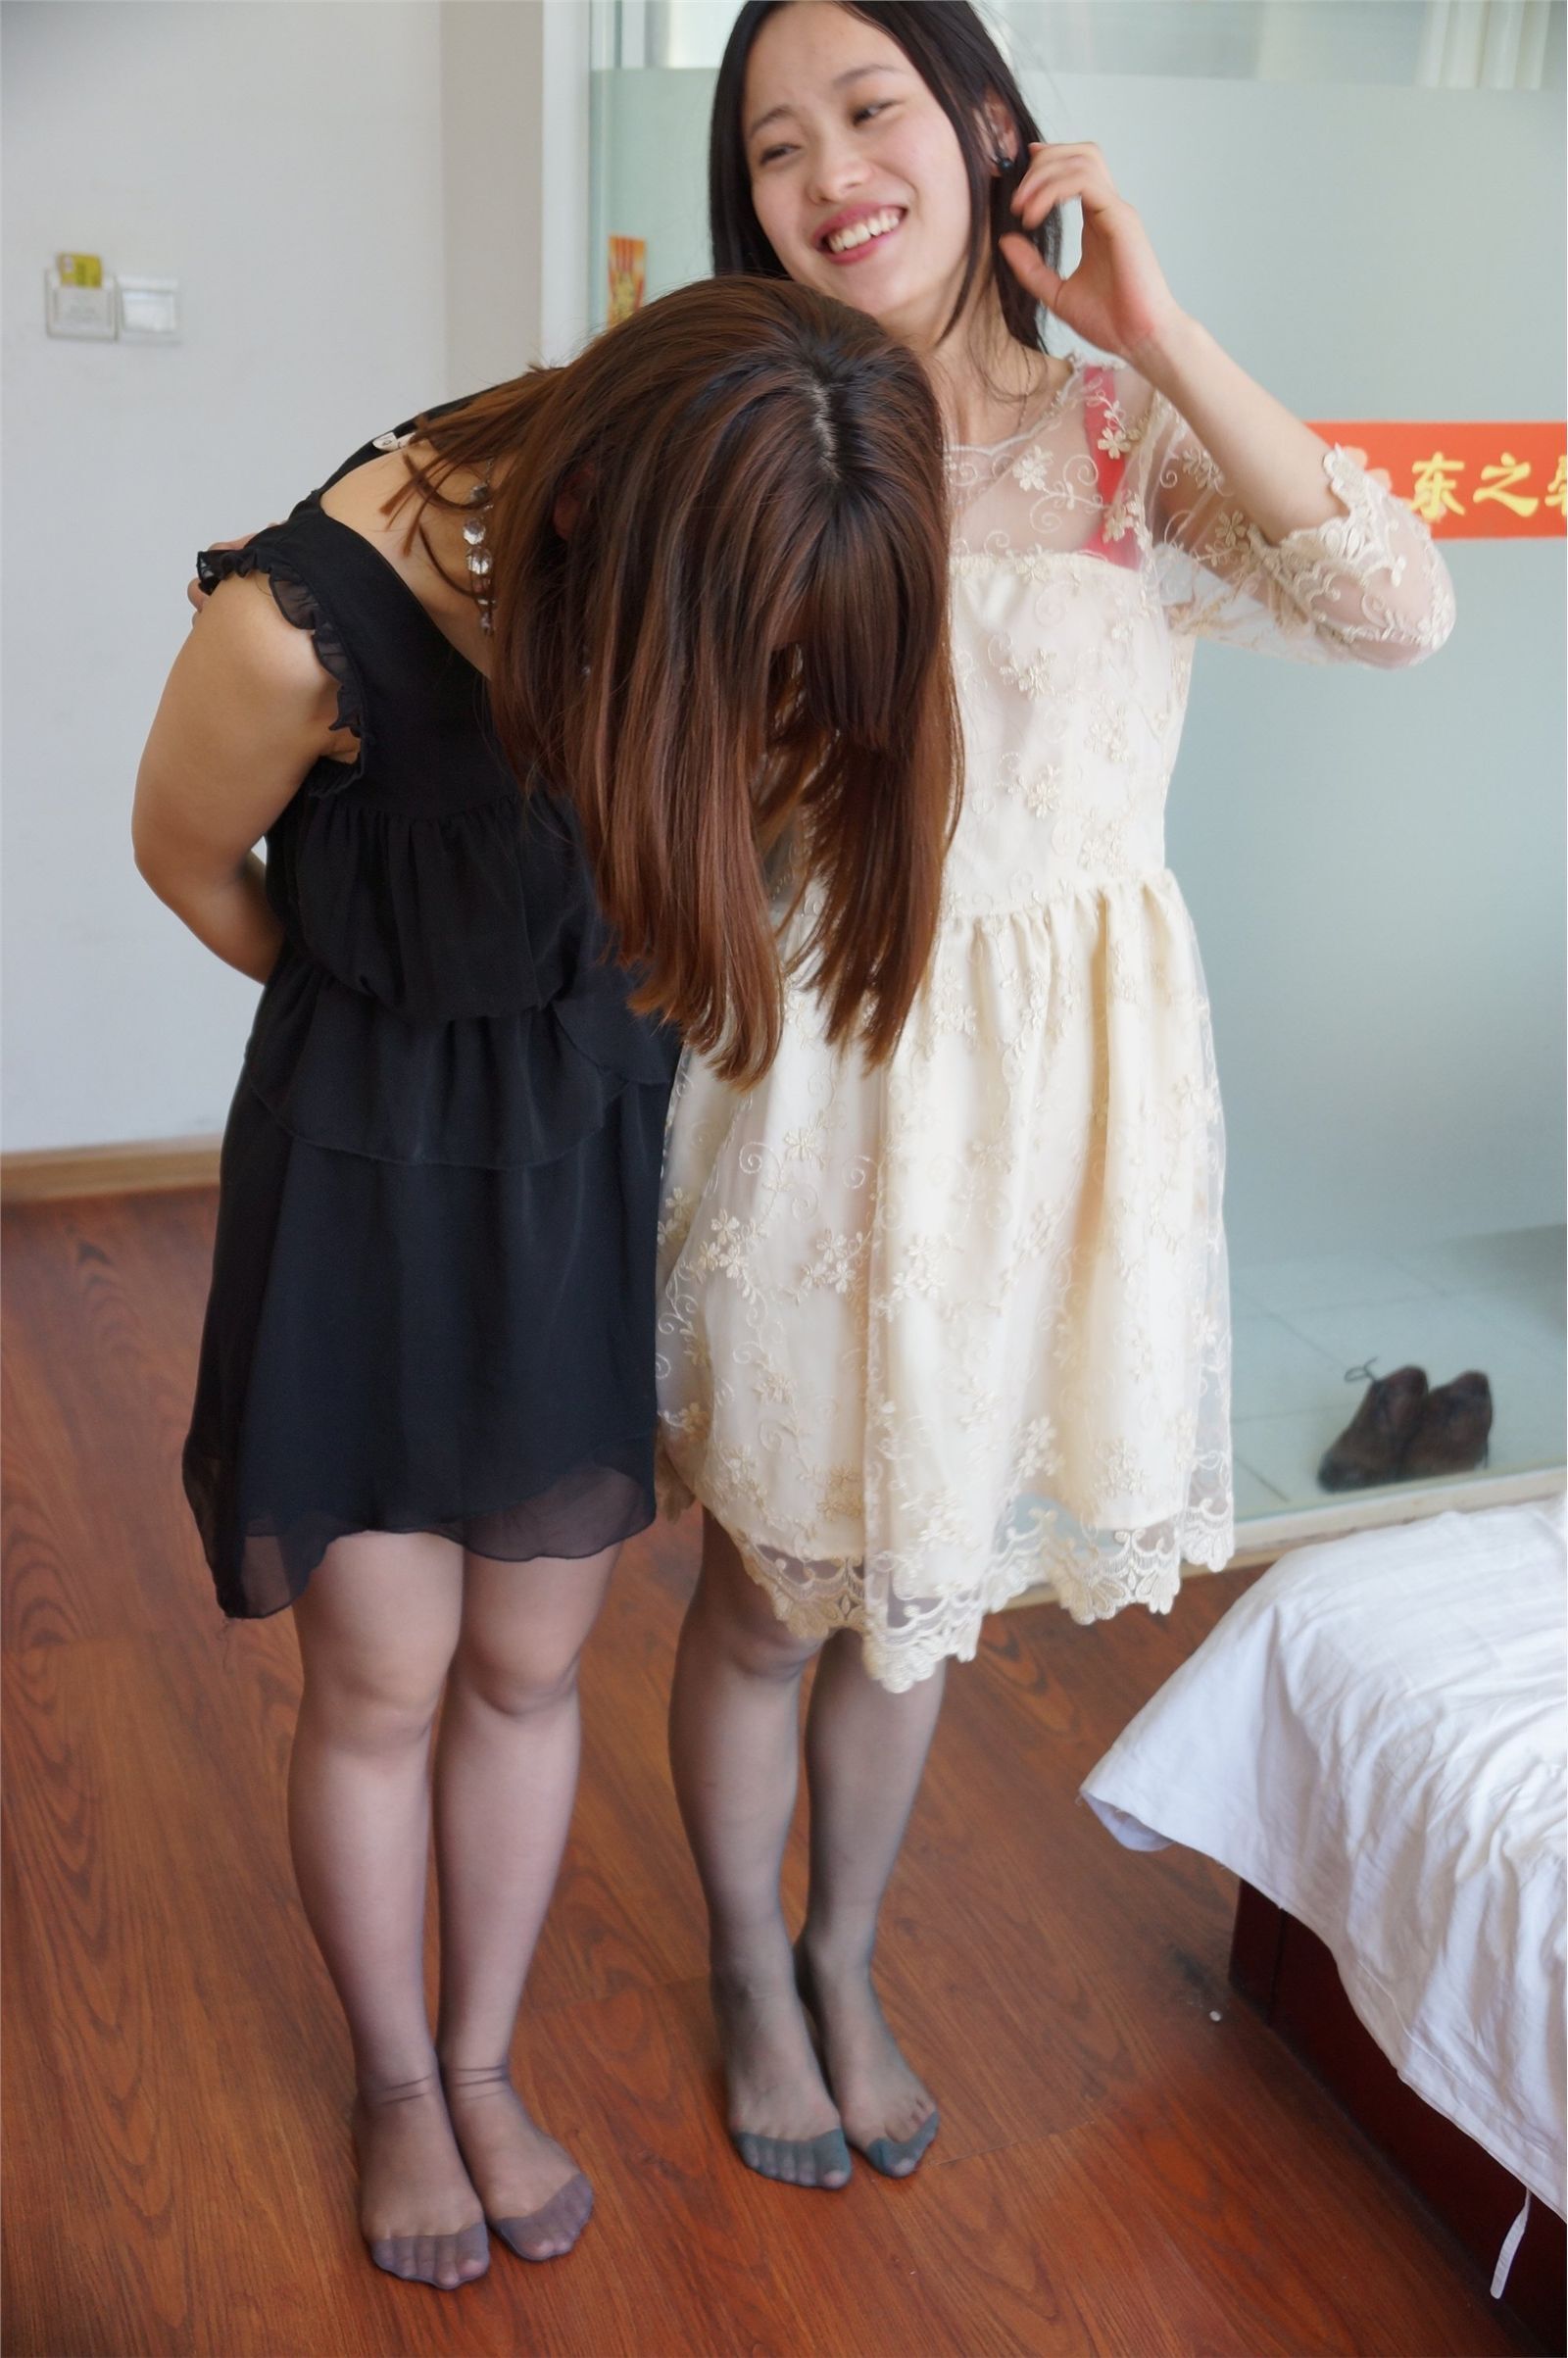 [online collection] on December 9, 2013, two beautiful women compete in bed silk feet